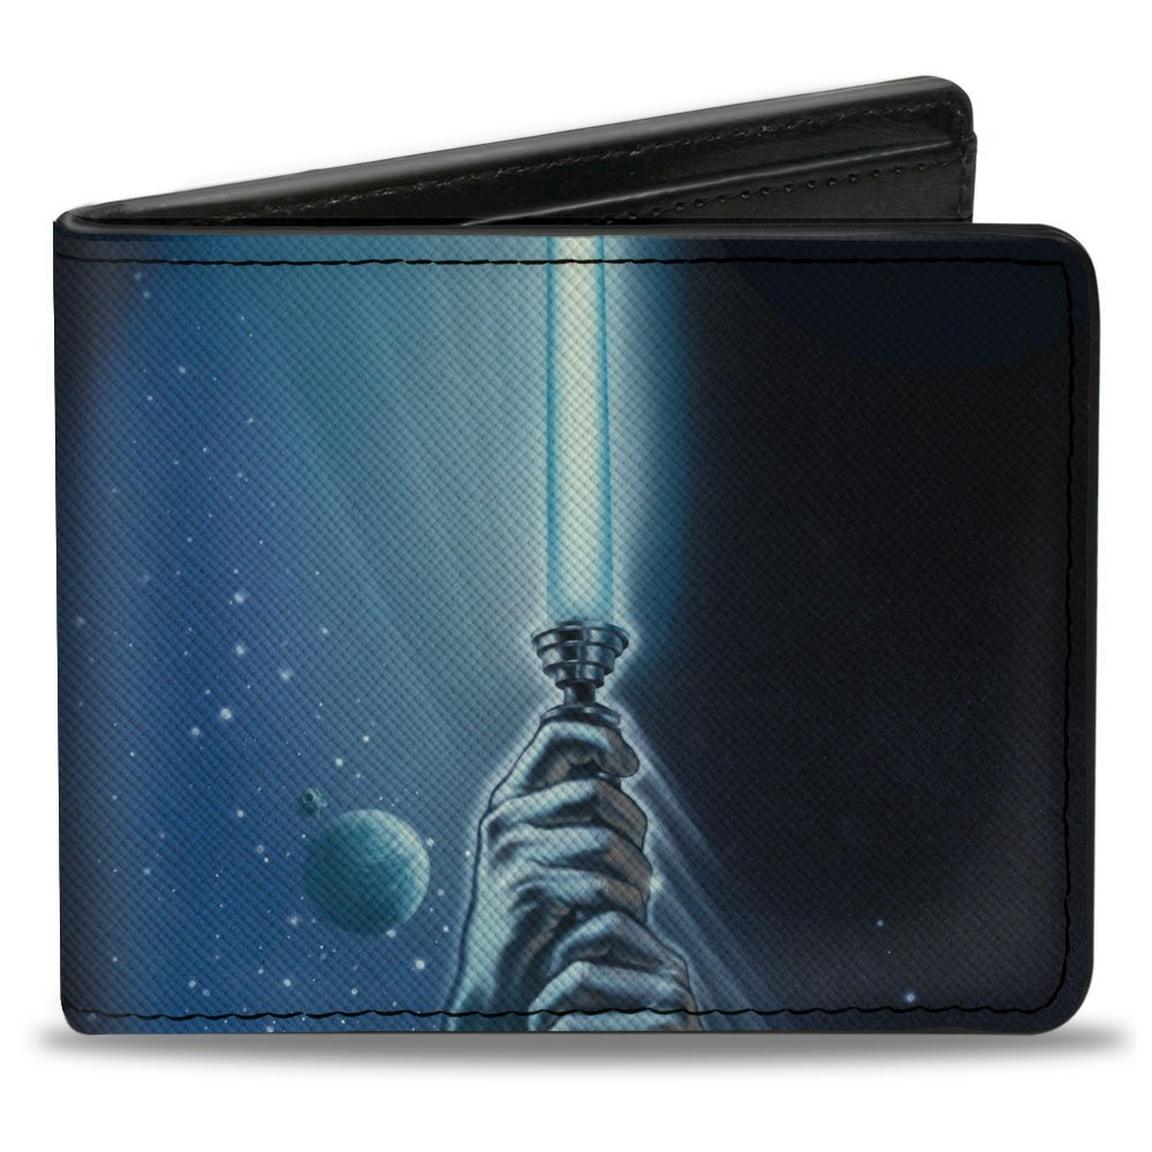 Buckle-Down Star Wars Luke Holding Lightsaber and Character Collage Men's Blue Vegan Leather Wallet, Size: One Size, Buckle Down